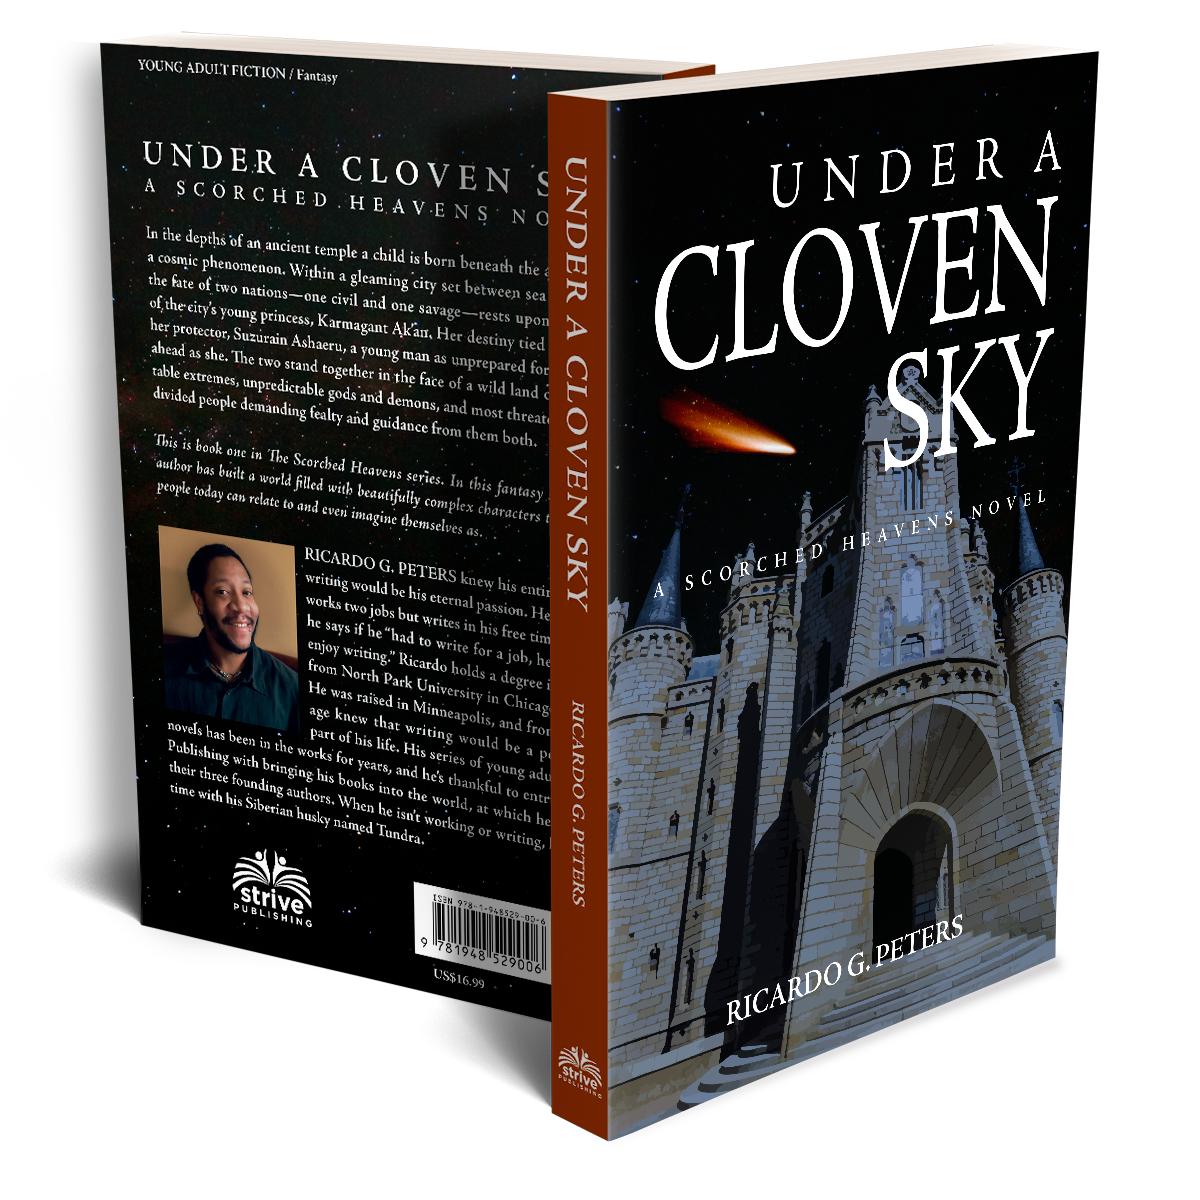 Under a Cloven Sky Covers